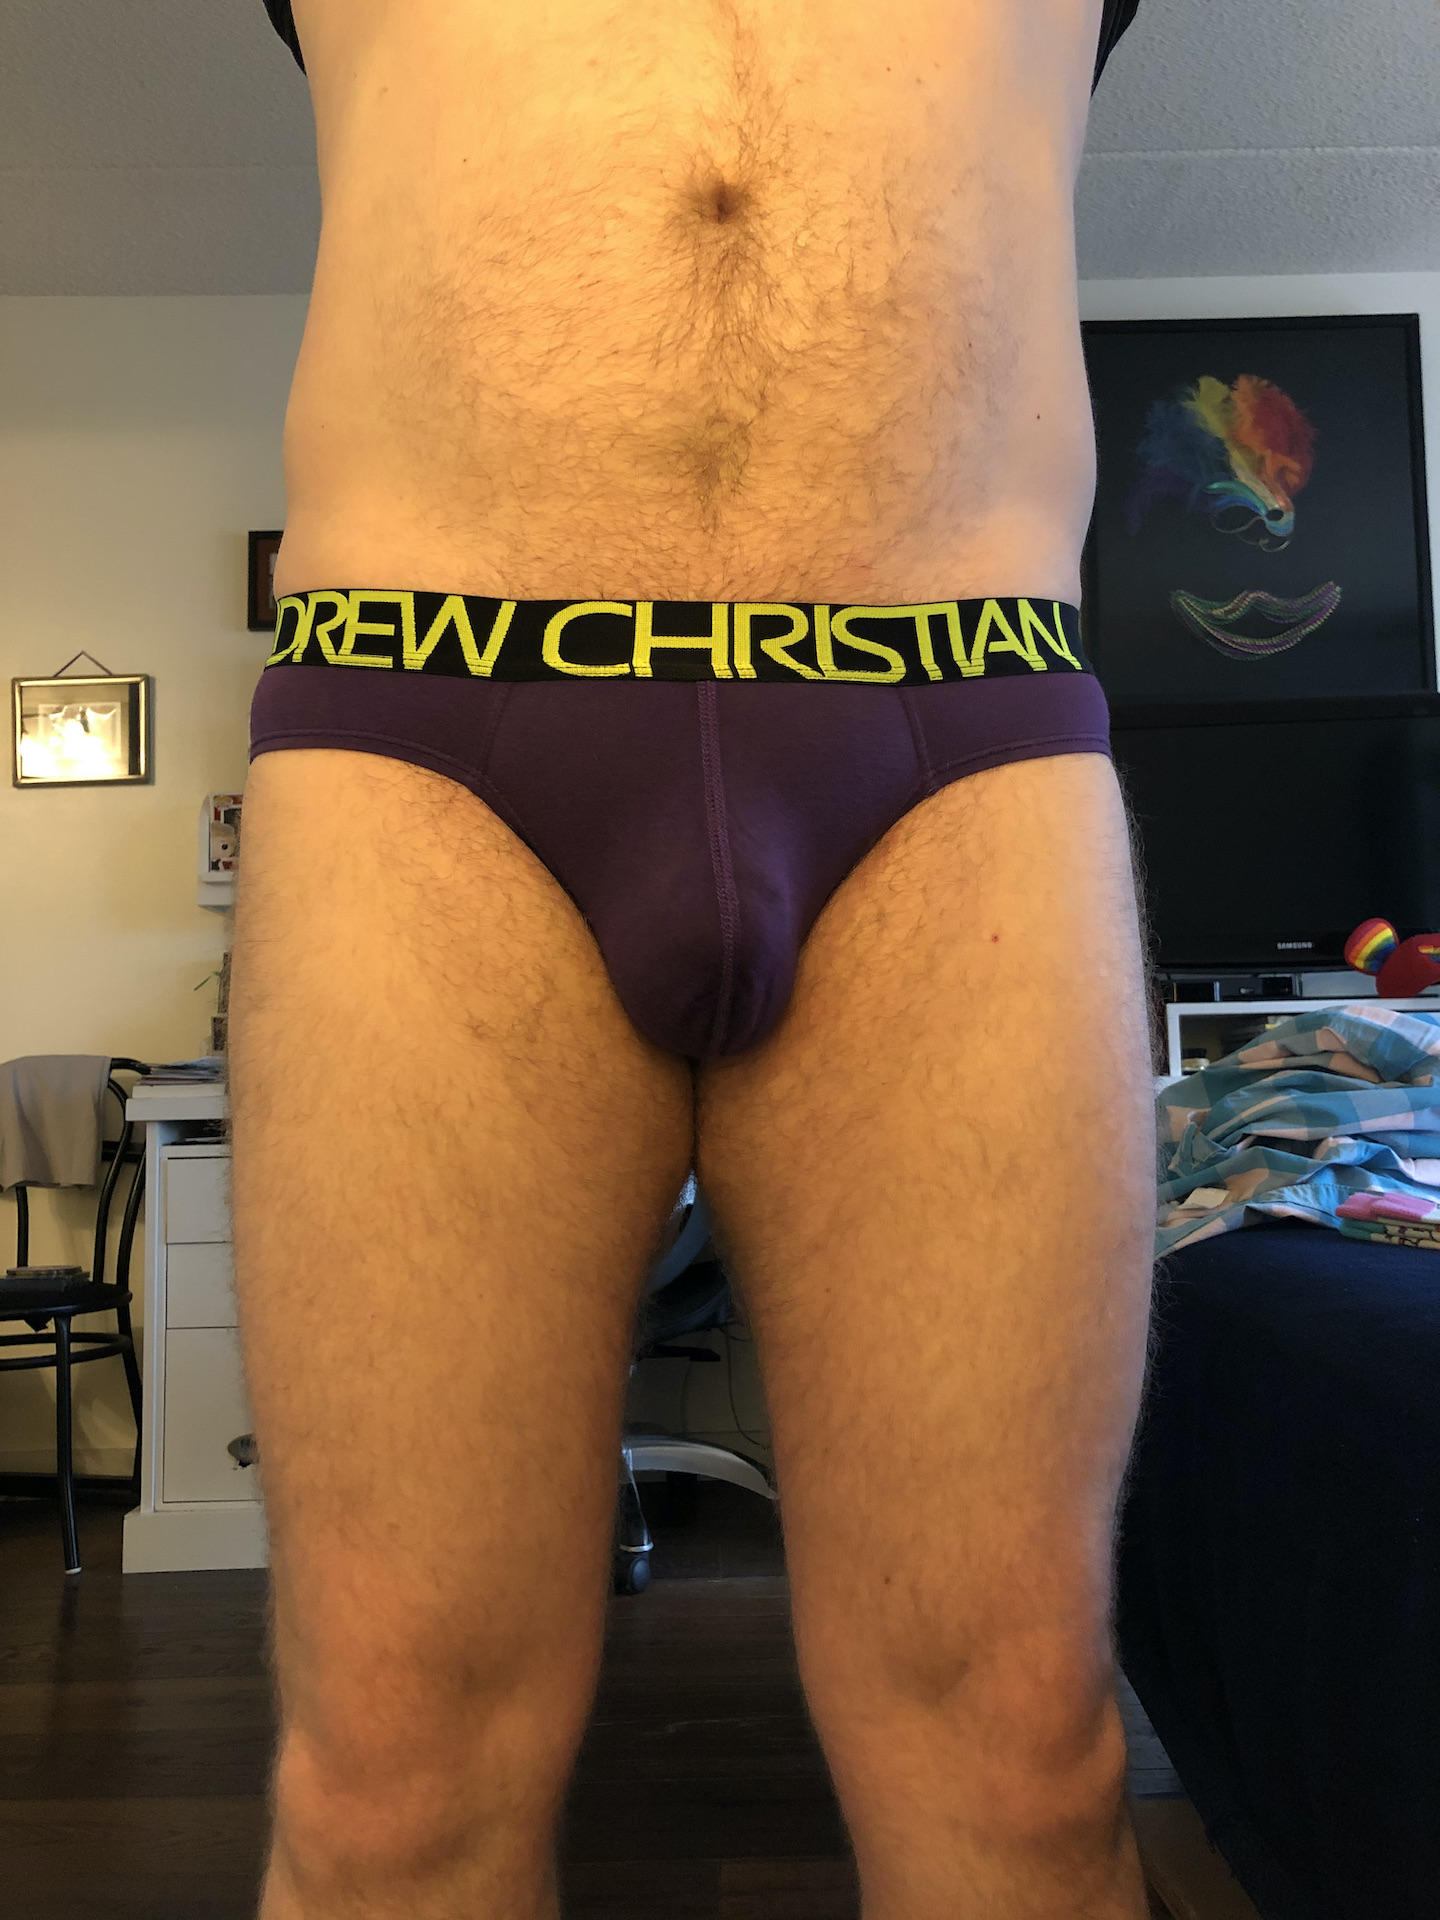 Shared love of undies? February Poll Results